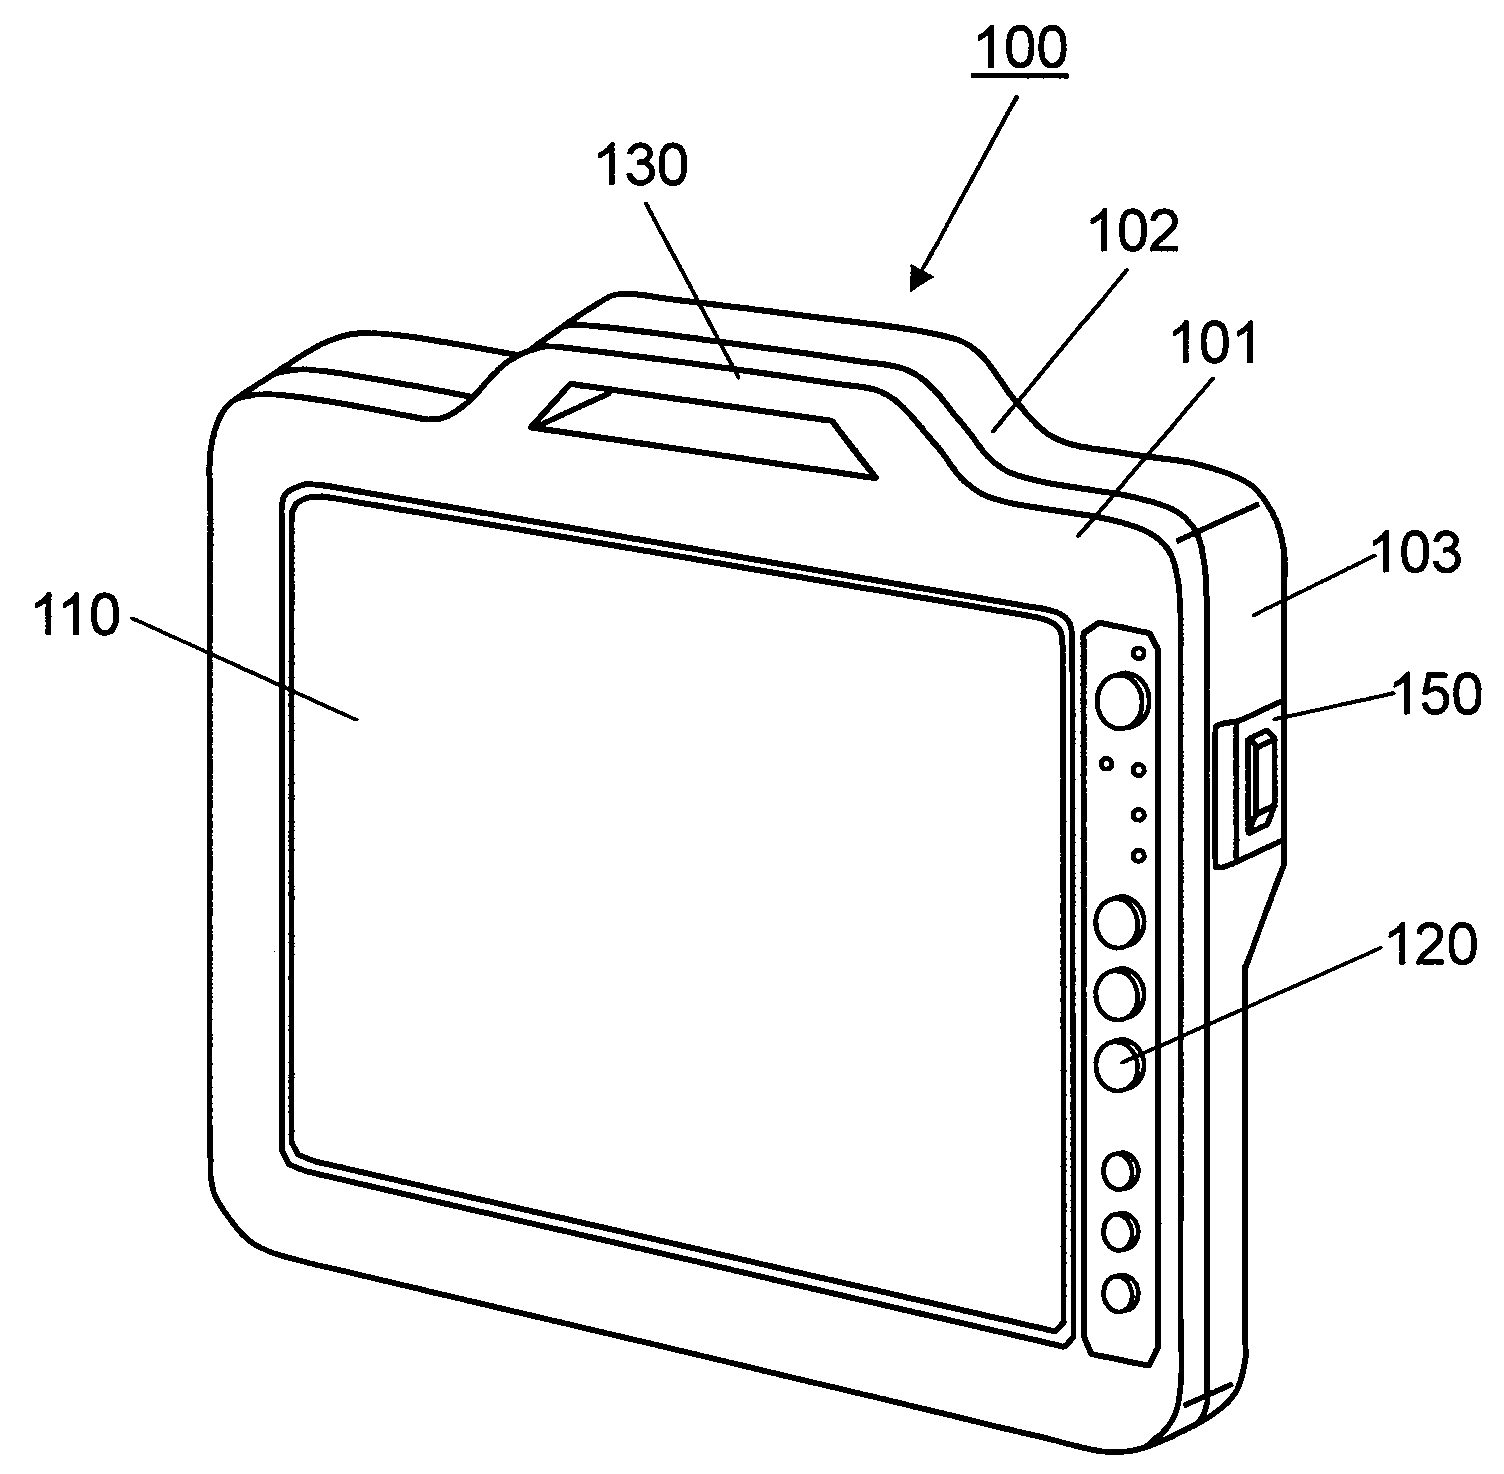 Lid member and electronic device using the same